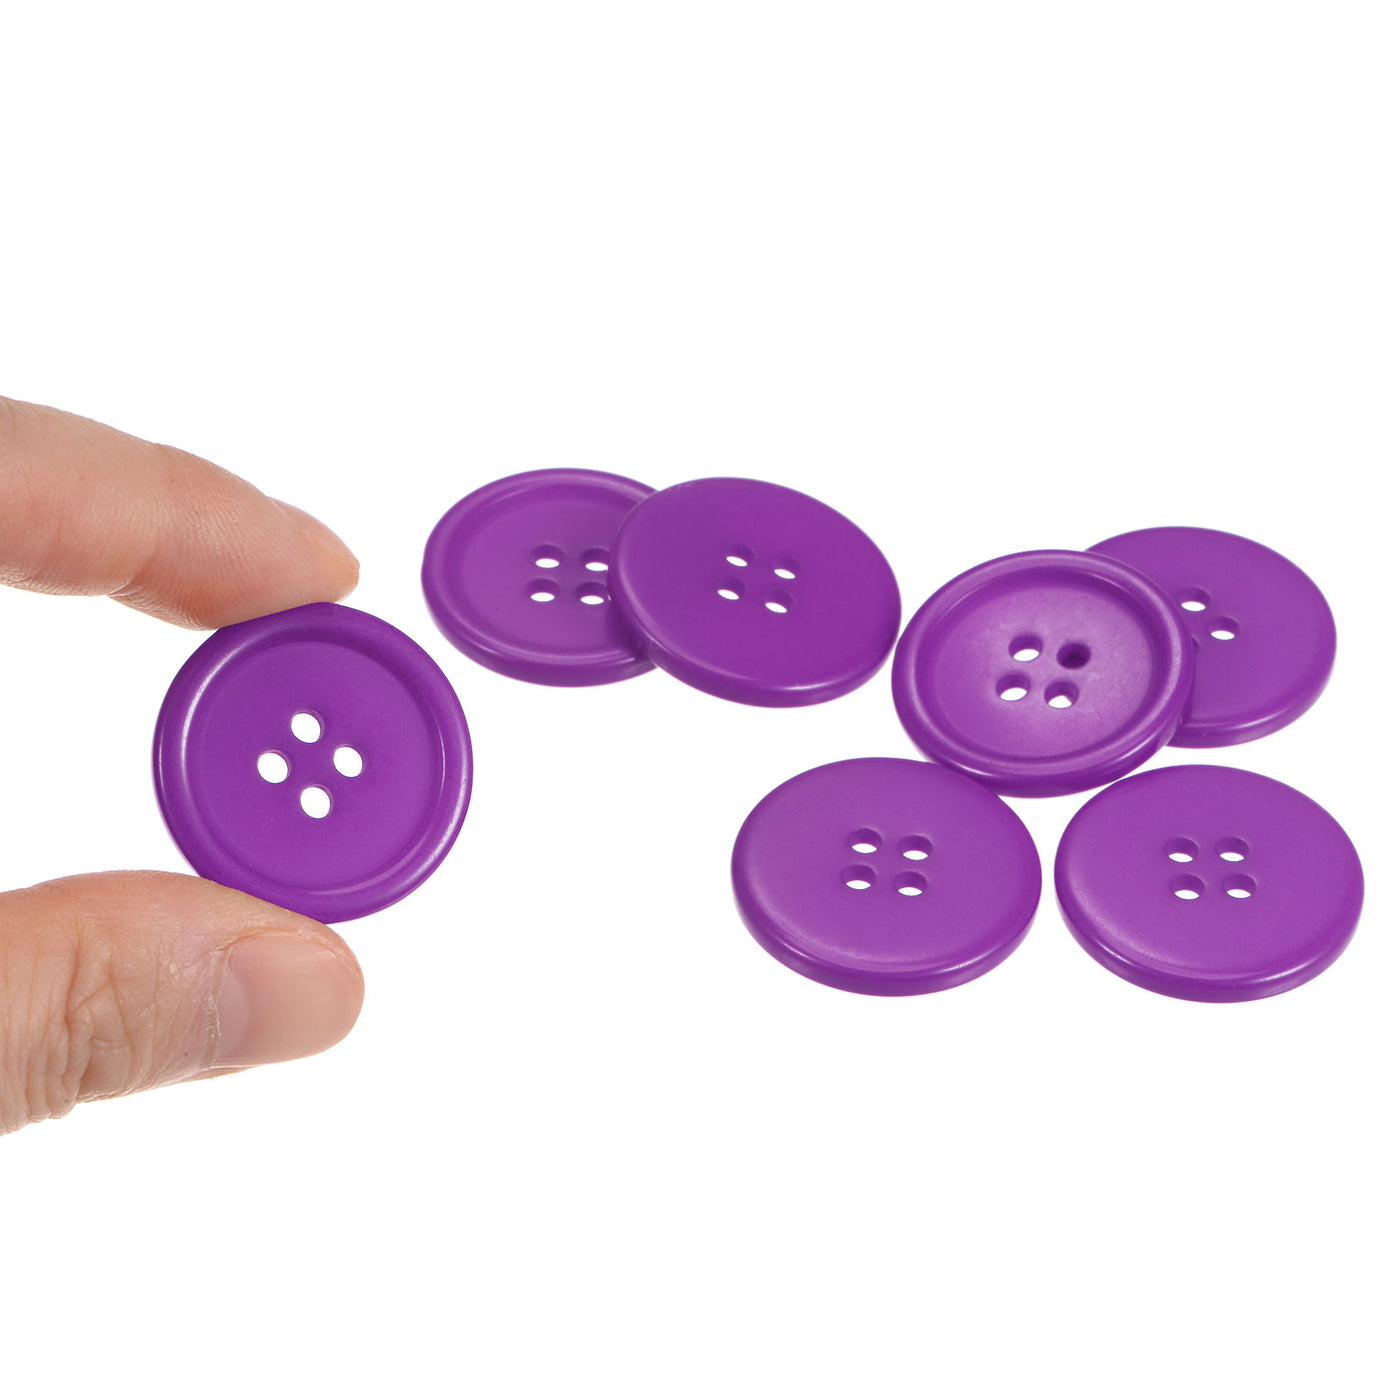 Harfington 60pcs 40L Sewing Buttons 1" Resin Round Flat 4-Hole Craft Buttons, Purple